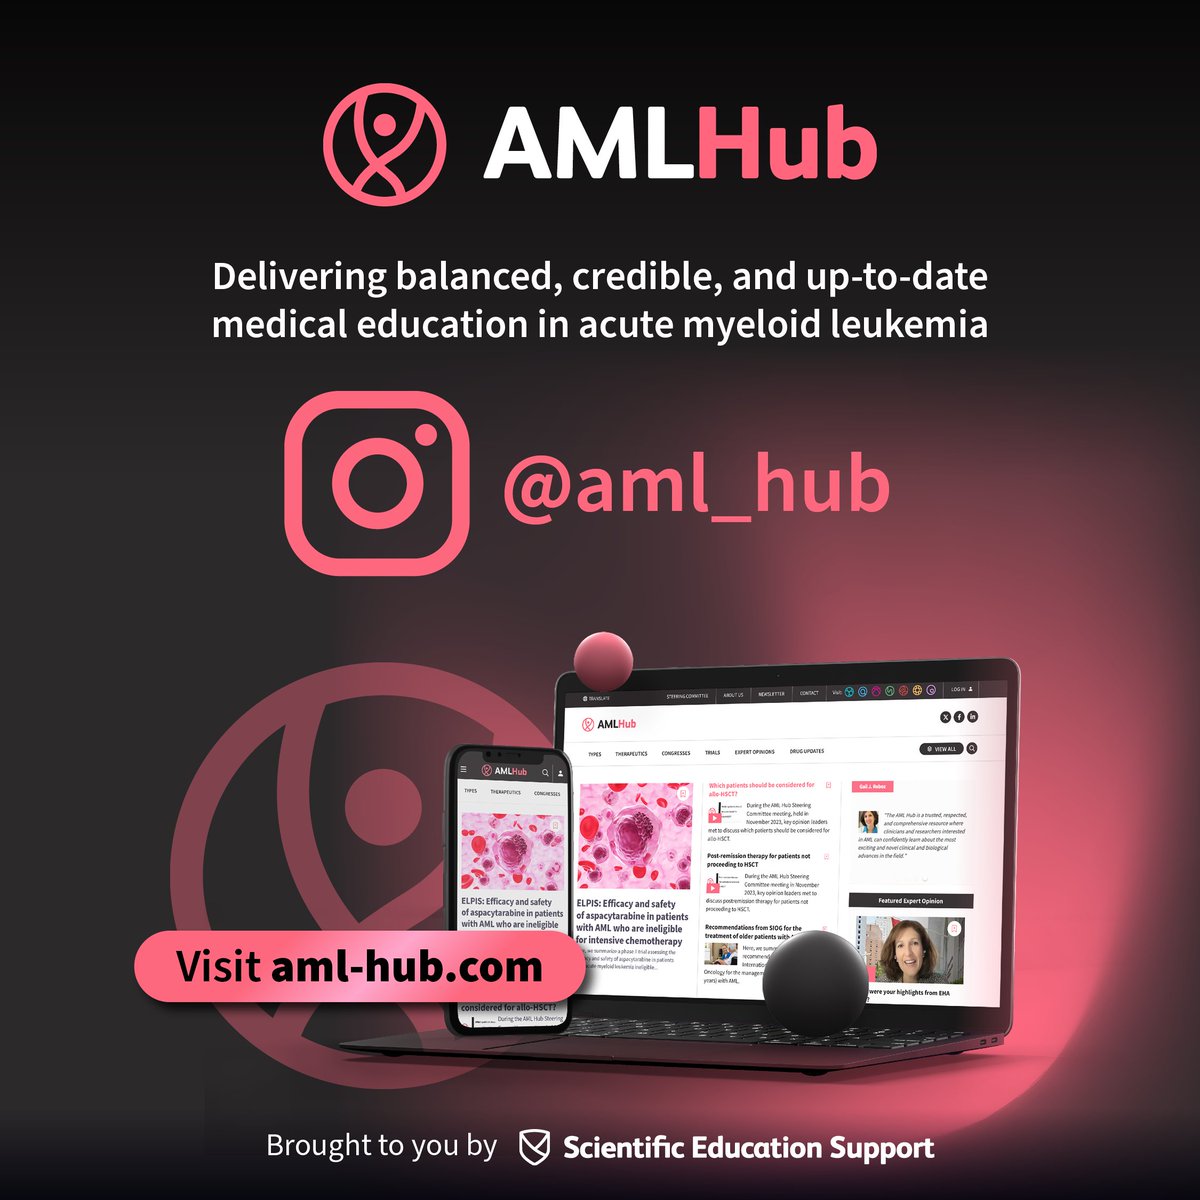 The AML Hub is pleased to announce the launch of our Instagram account, aml_hub. Follow us to keep up-to-date with all the latest insights and medical education in Acute Myeloid Leukemia #AML #MedicalEducation #IME